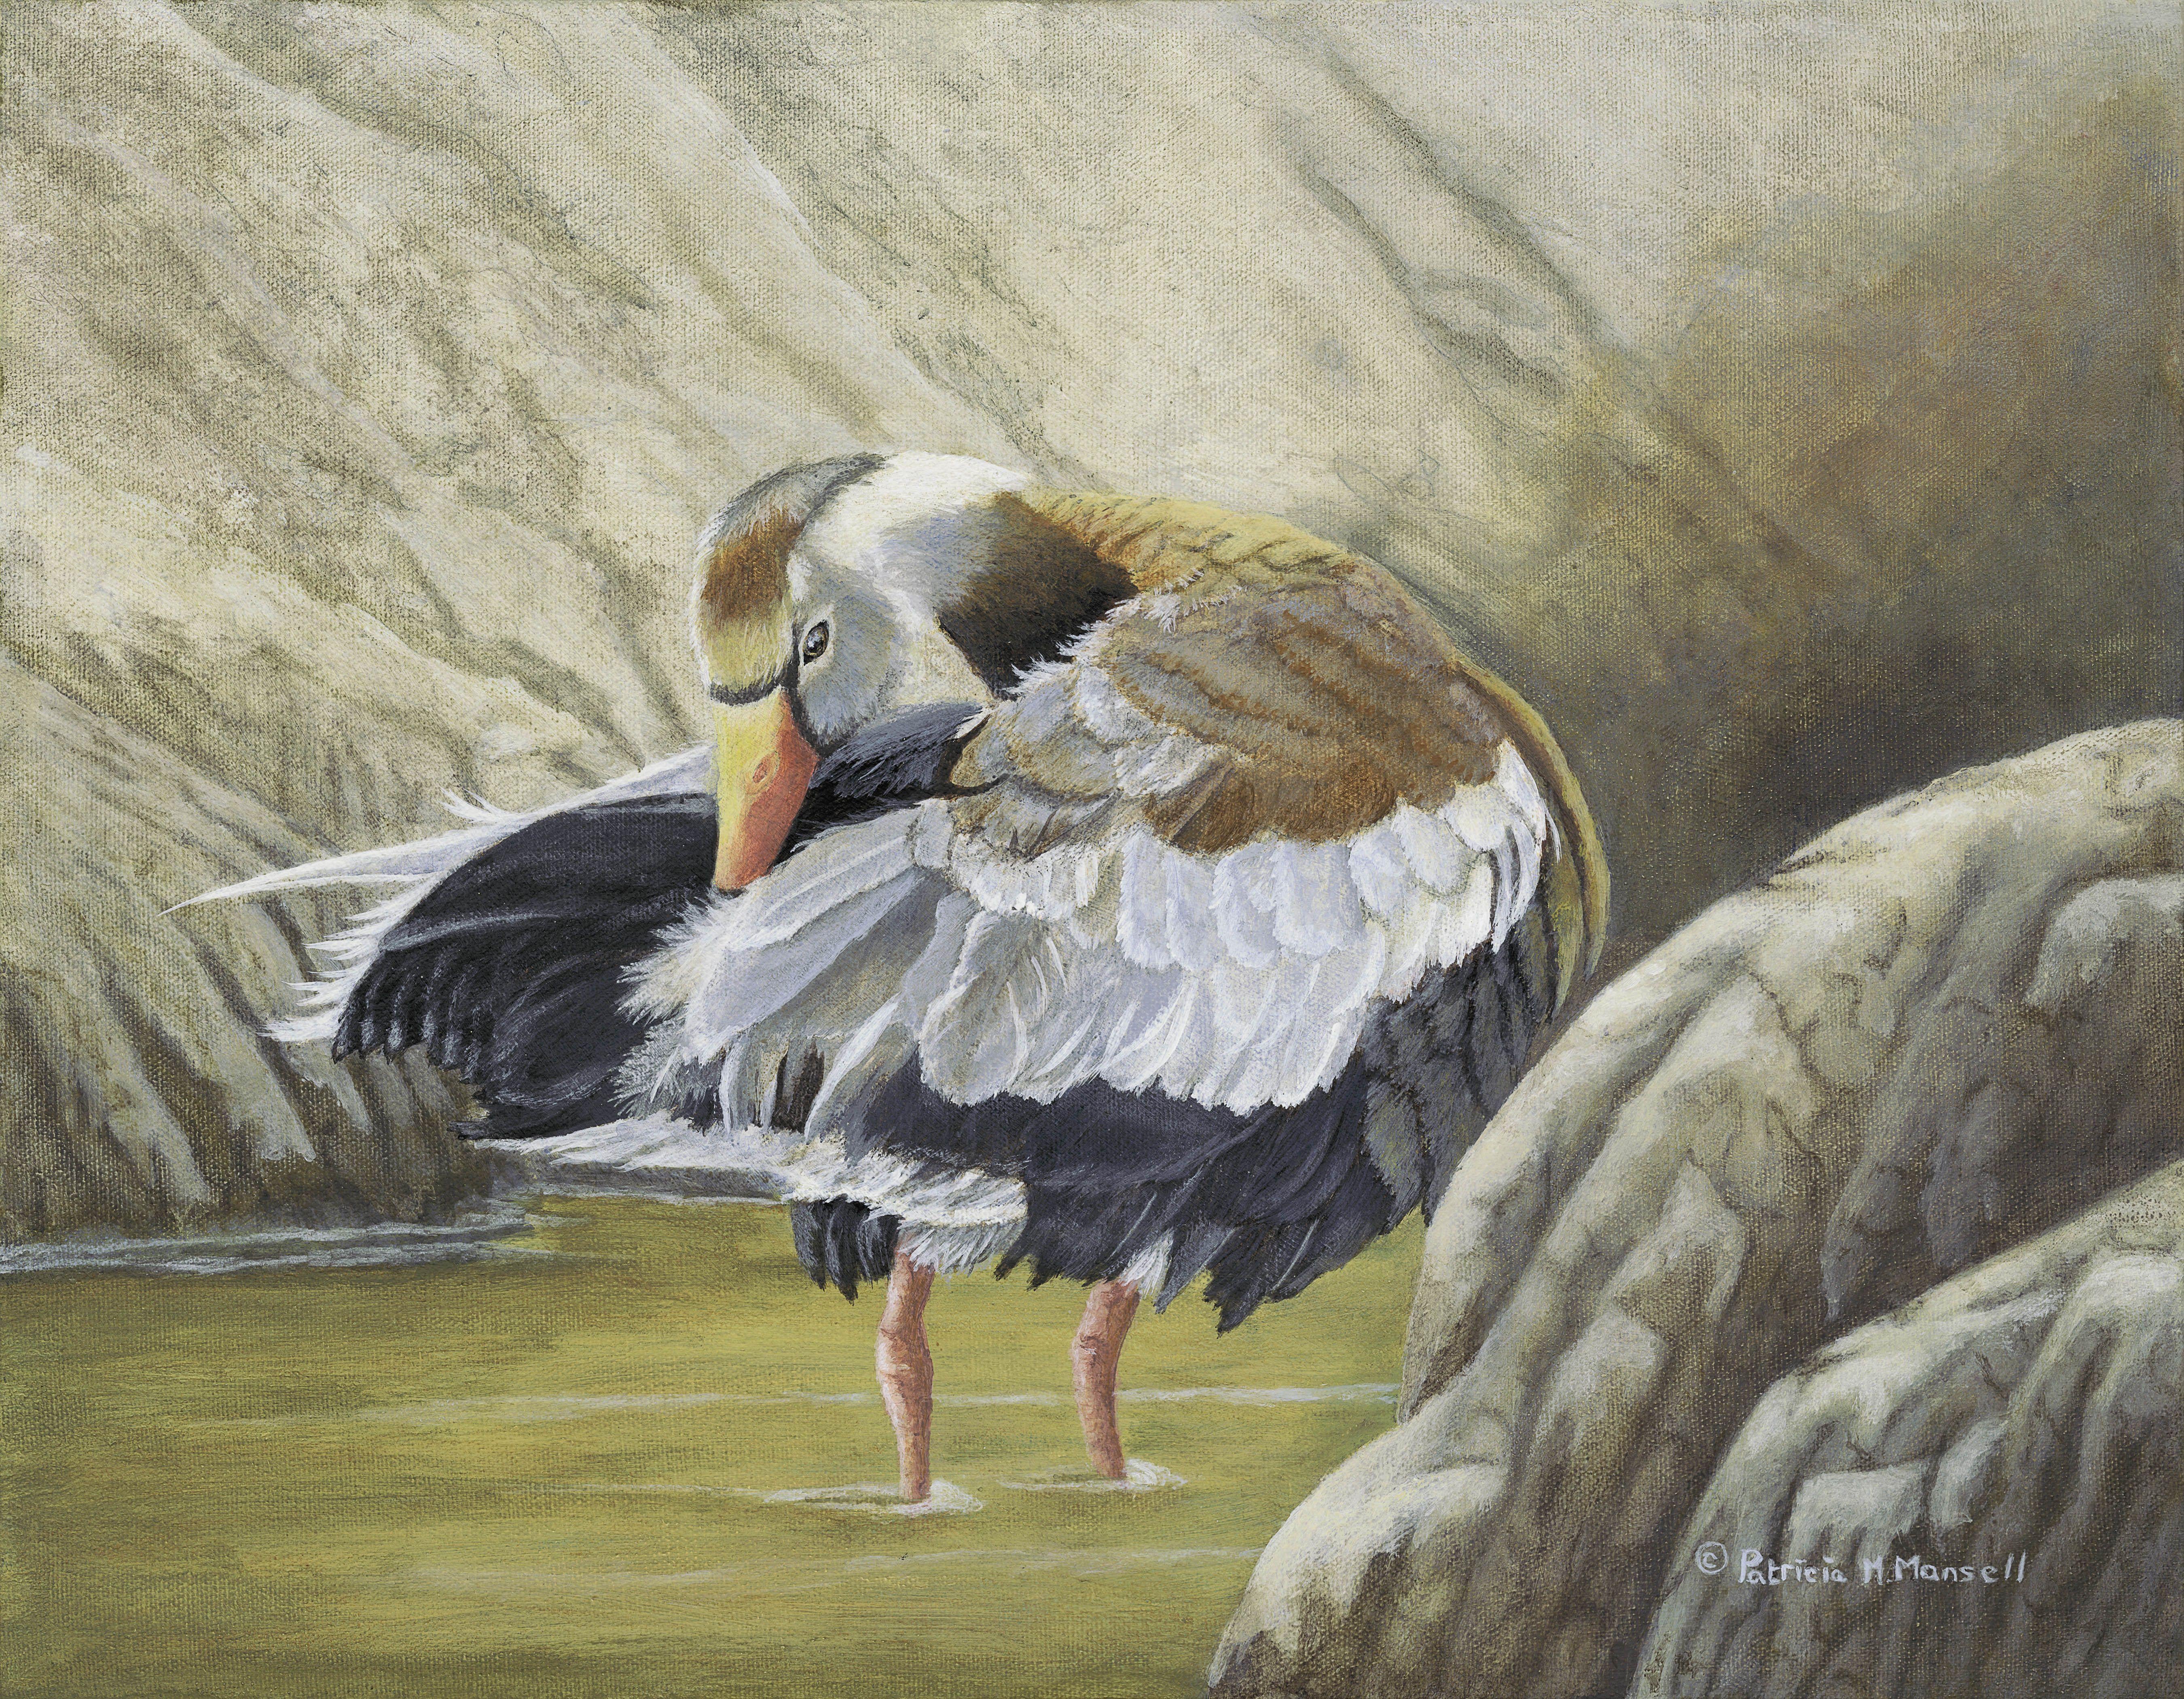 Patricia Mansell Animal Painting - Feather by Feather (Whistling Duck), Painting, Acrylic on Canvas